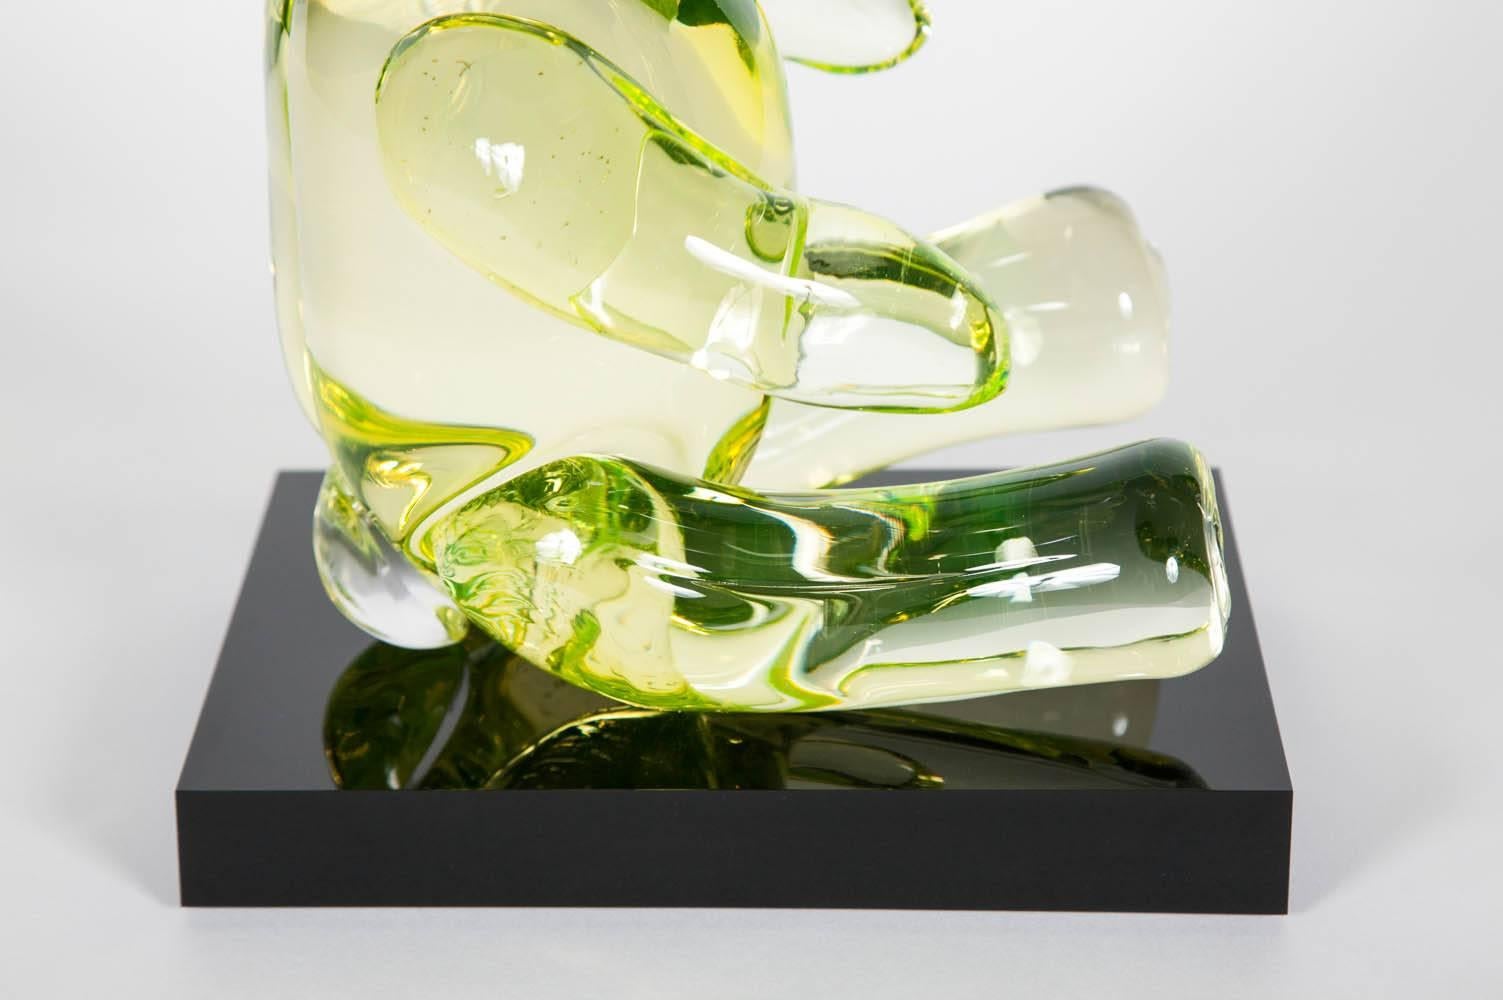 Contemporary Bear, a unique lime green glass sculpted animal figurine by Elliot Walker